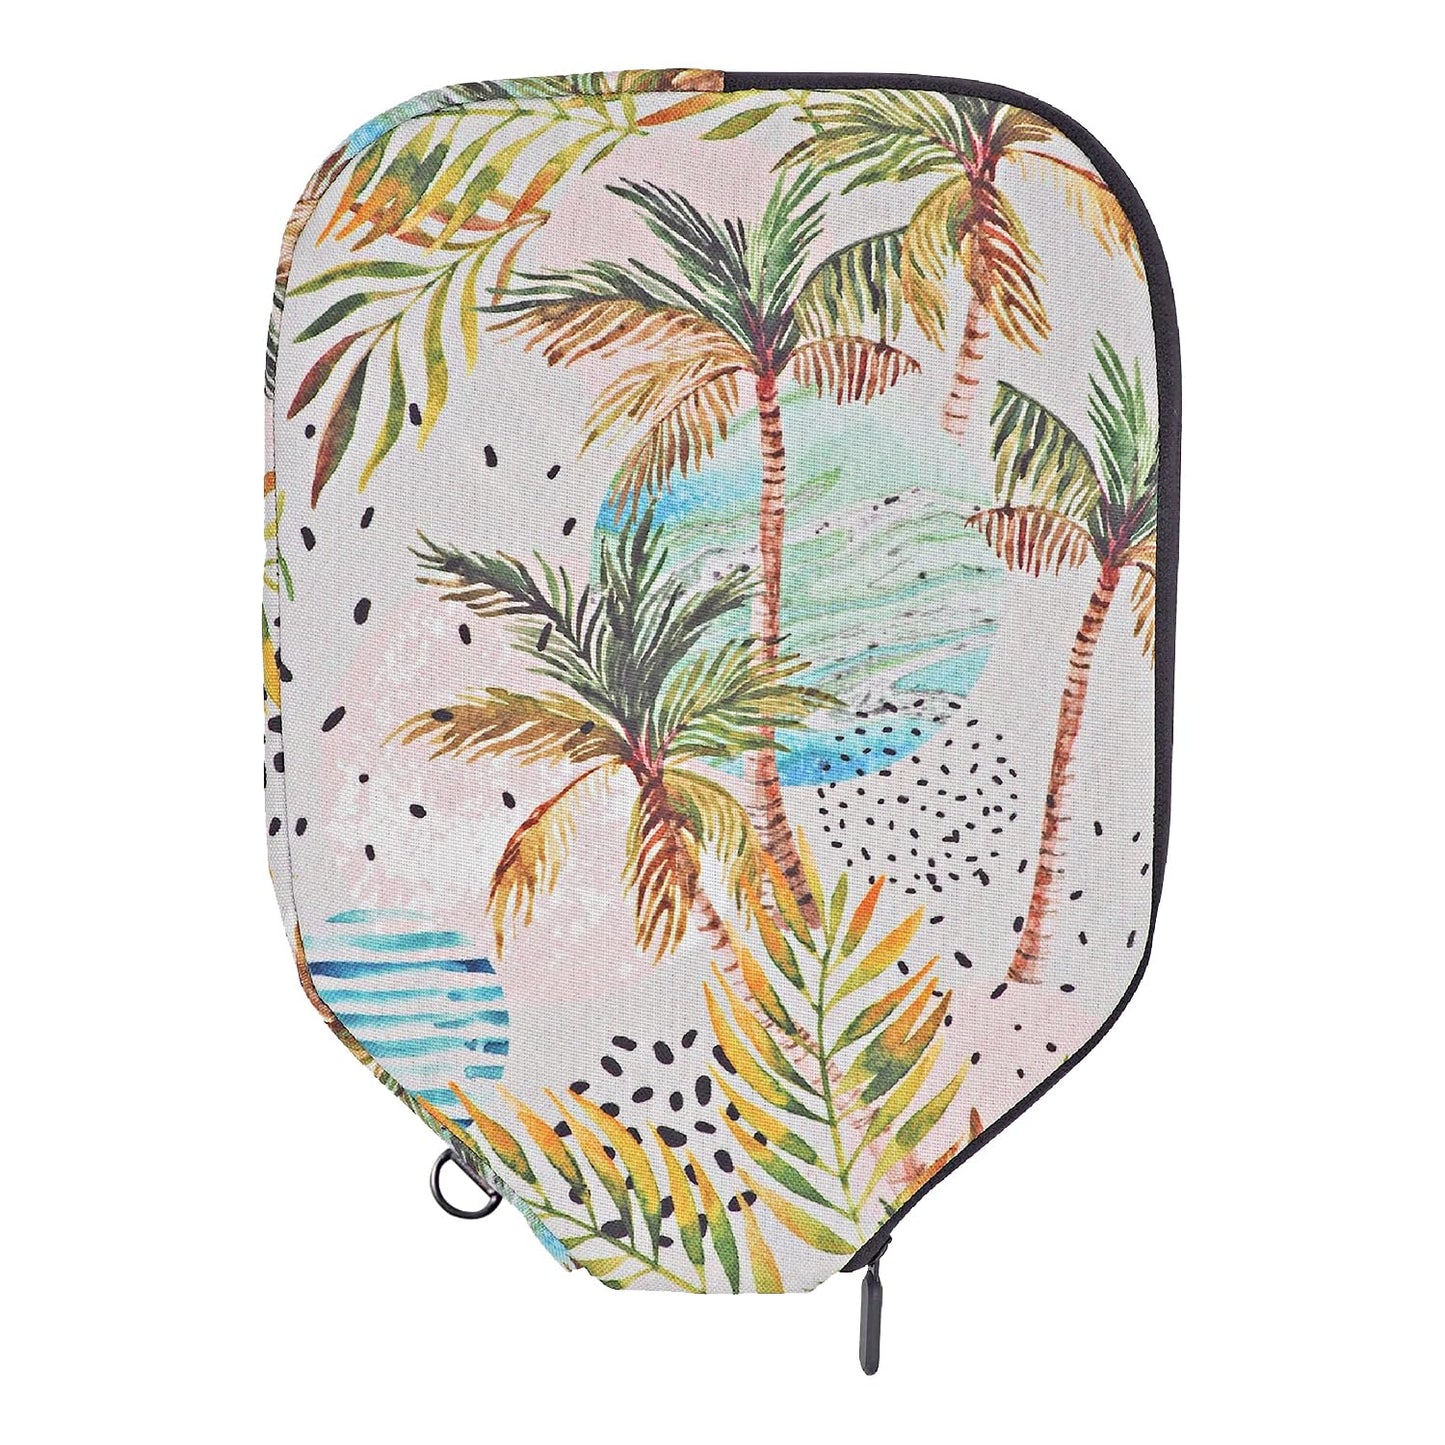 Circled Palms Pickleball Paddle Cover - Standard - Palms-O-Aces